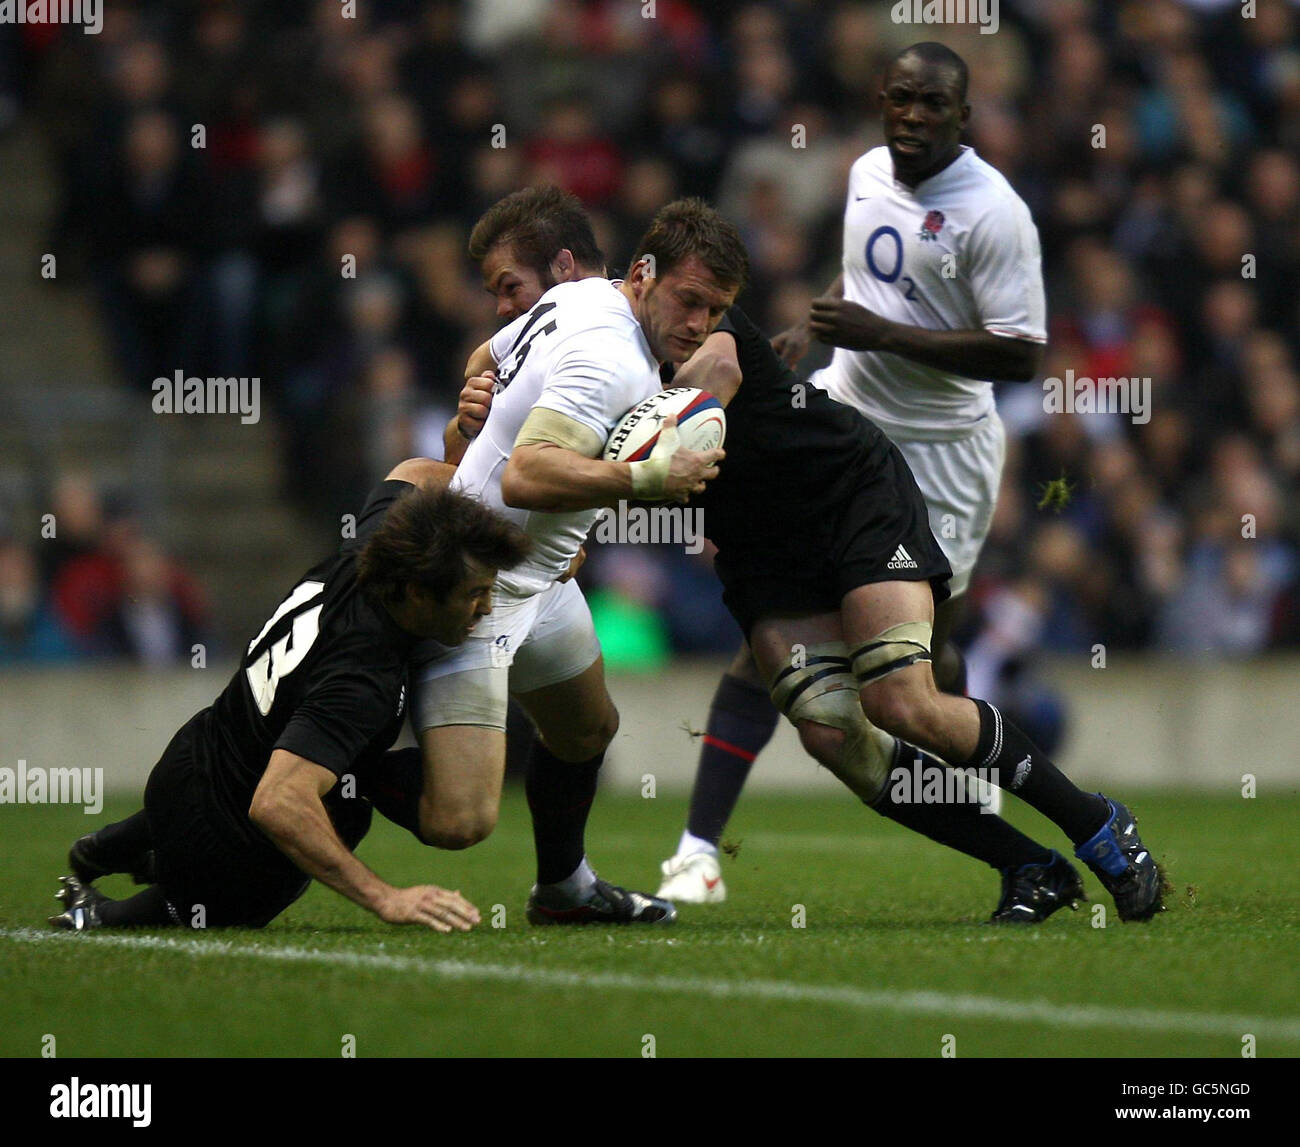 England's Mark Cueto (centre) is tackled by New Zealand's Conrad Smith (left) and Richie McCaw (right) during the Investec Challenge Series 2009 match at Twickenham, London. Stock Photo